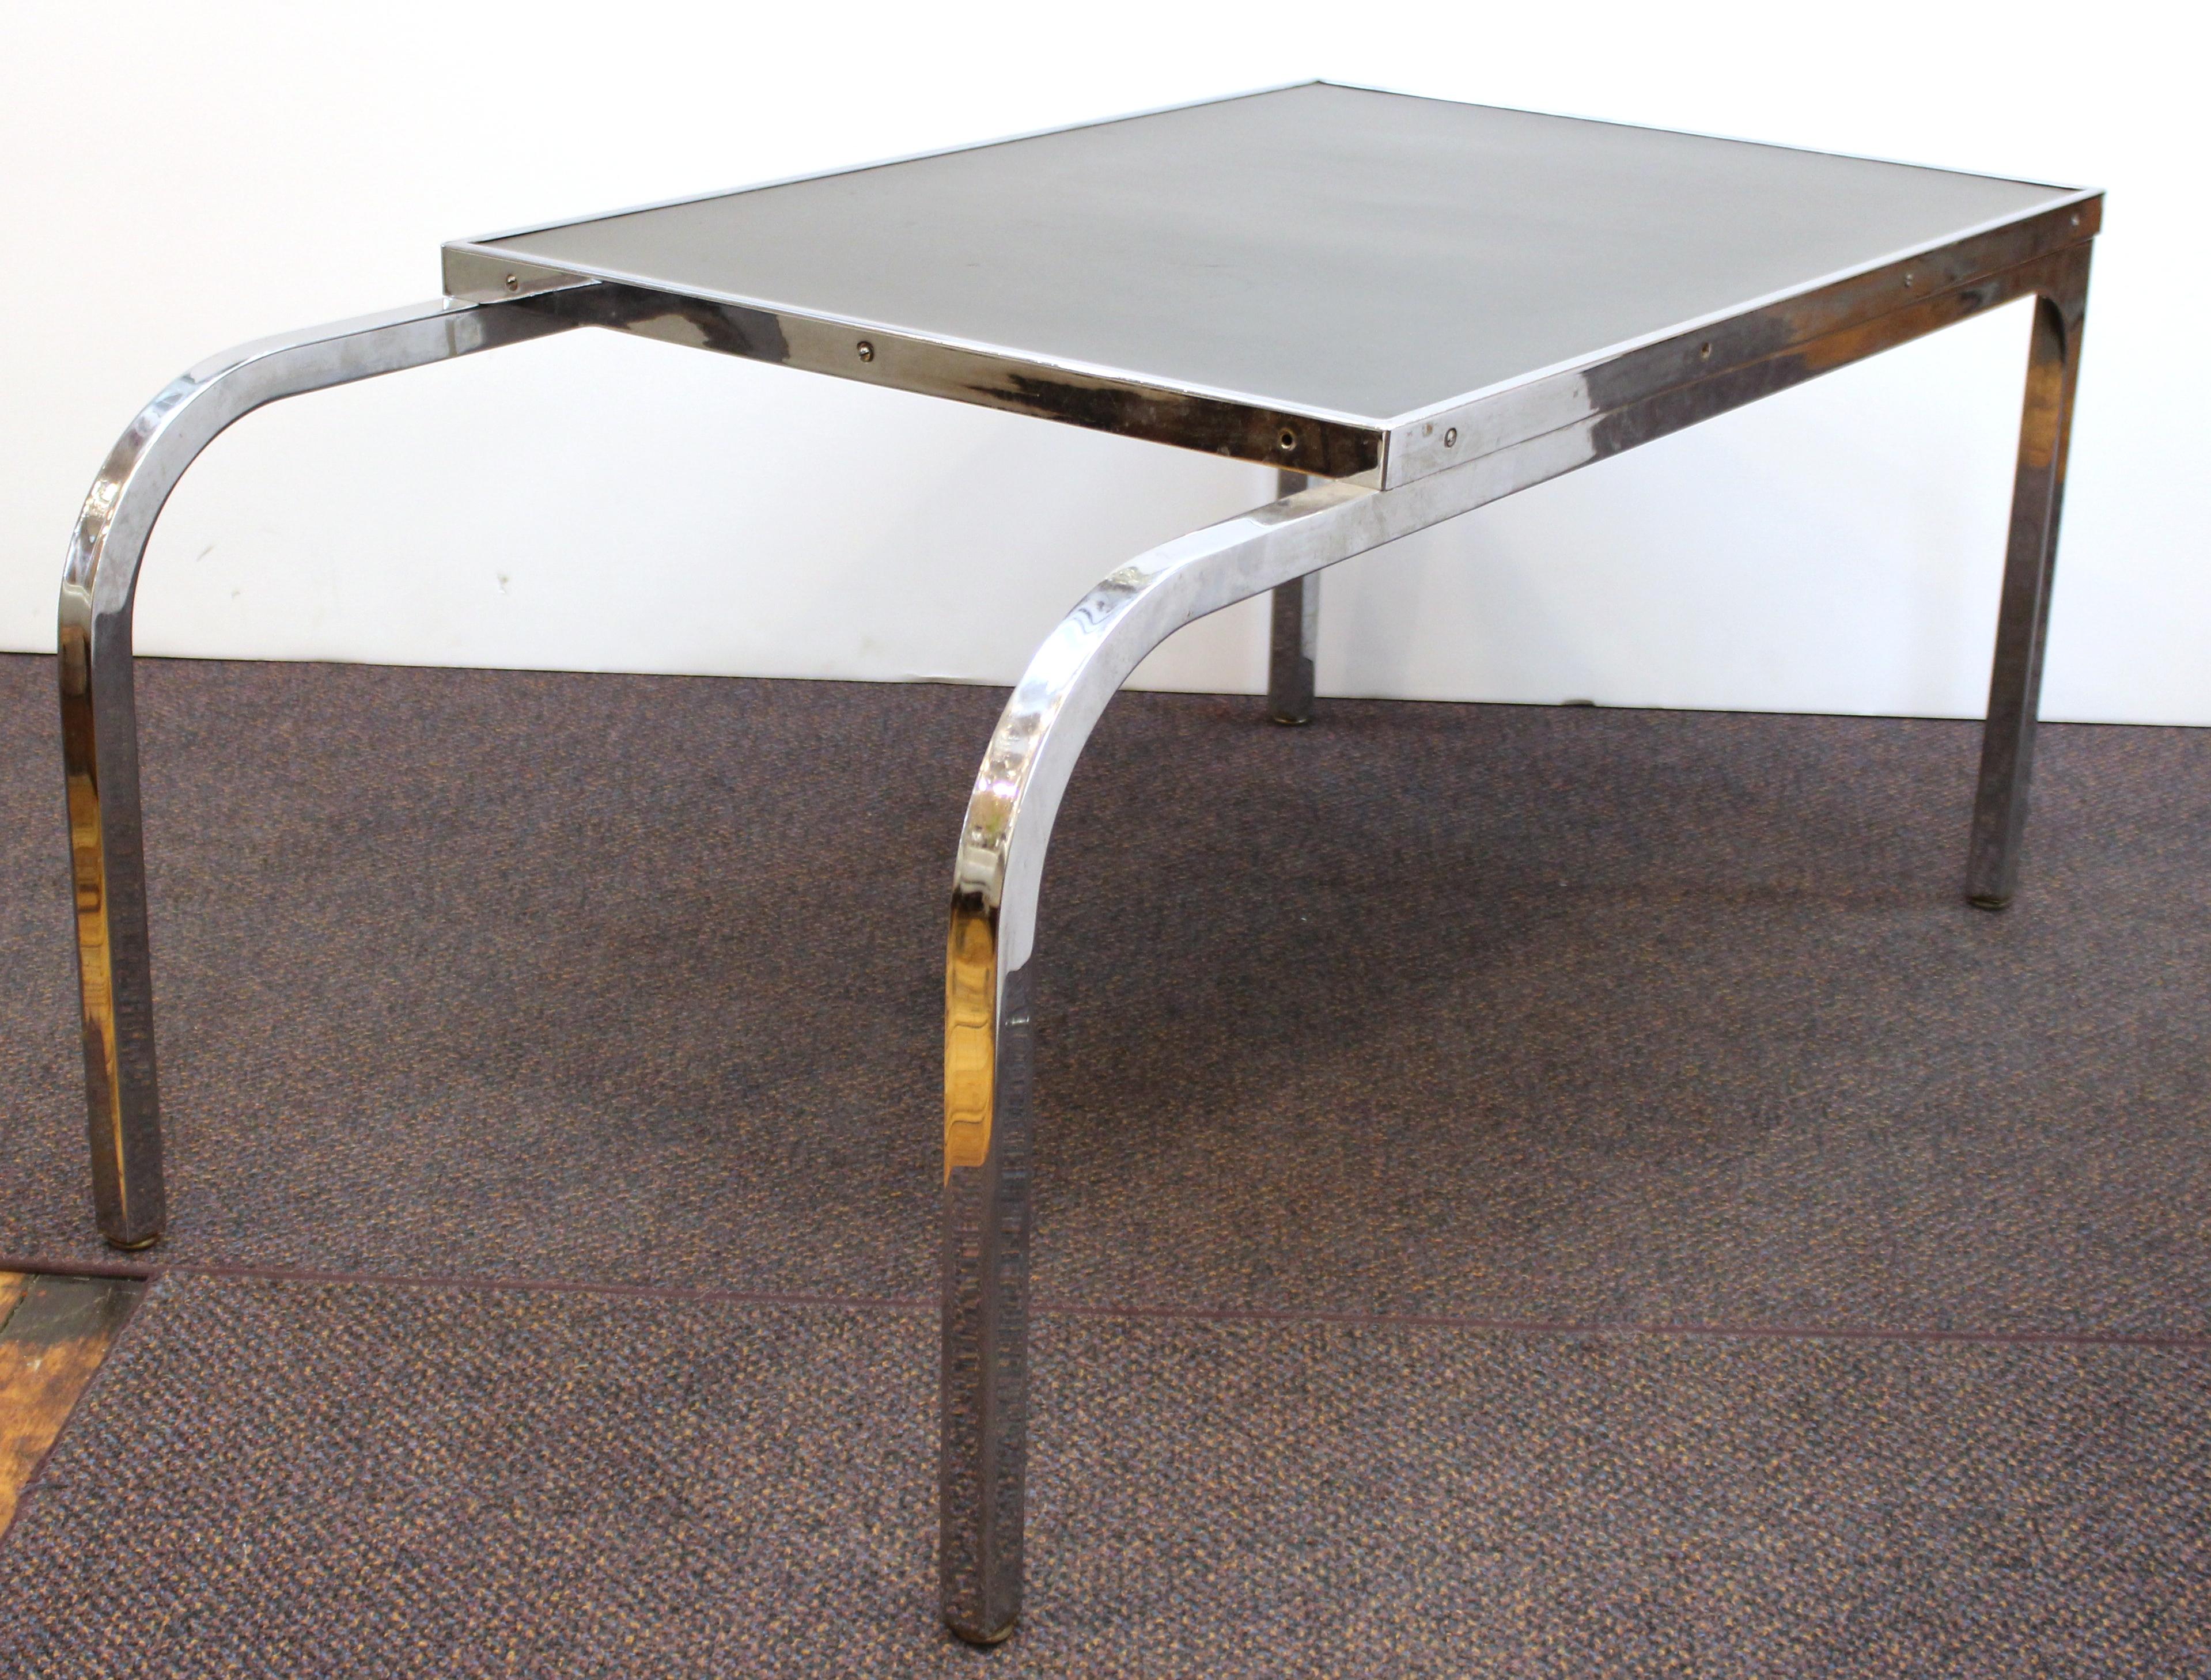 American Machine Age period chromed metal side table or end table designed by Gilbert Rohde for the Troy Sunshade Company. The piece was likely made in the 1930s in the United States and comes with a black formica top and curved front legs.
Label on